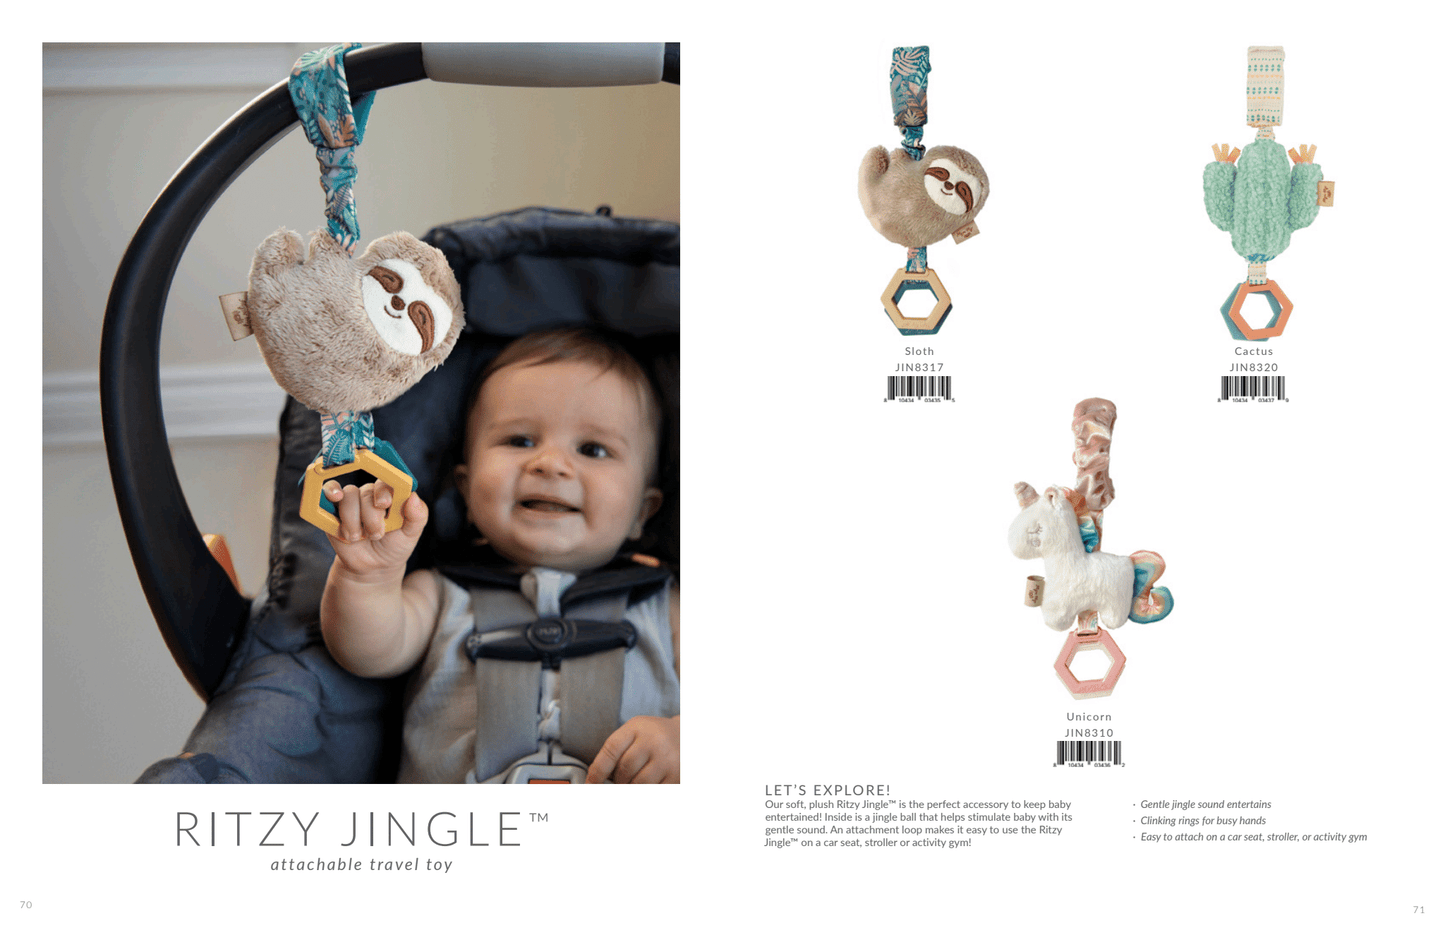 Ritzy Jingle™ Sloth Attachable Travel Toy